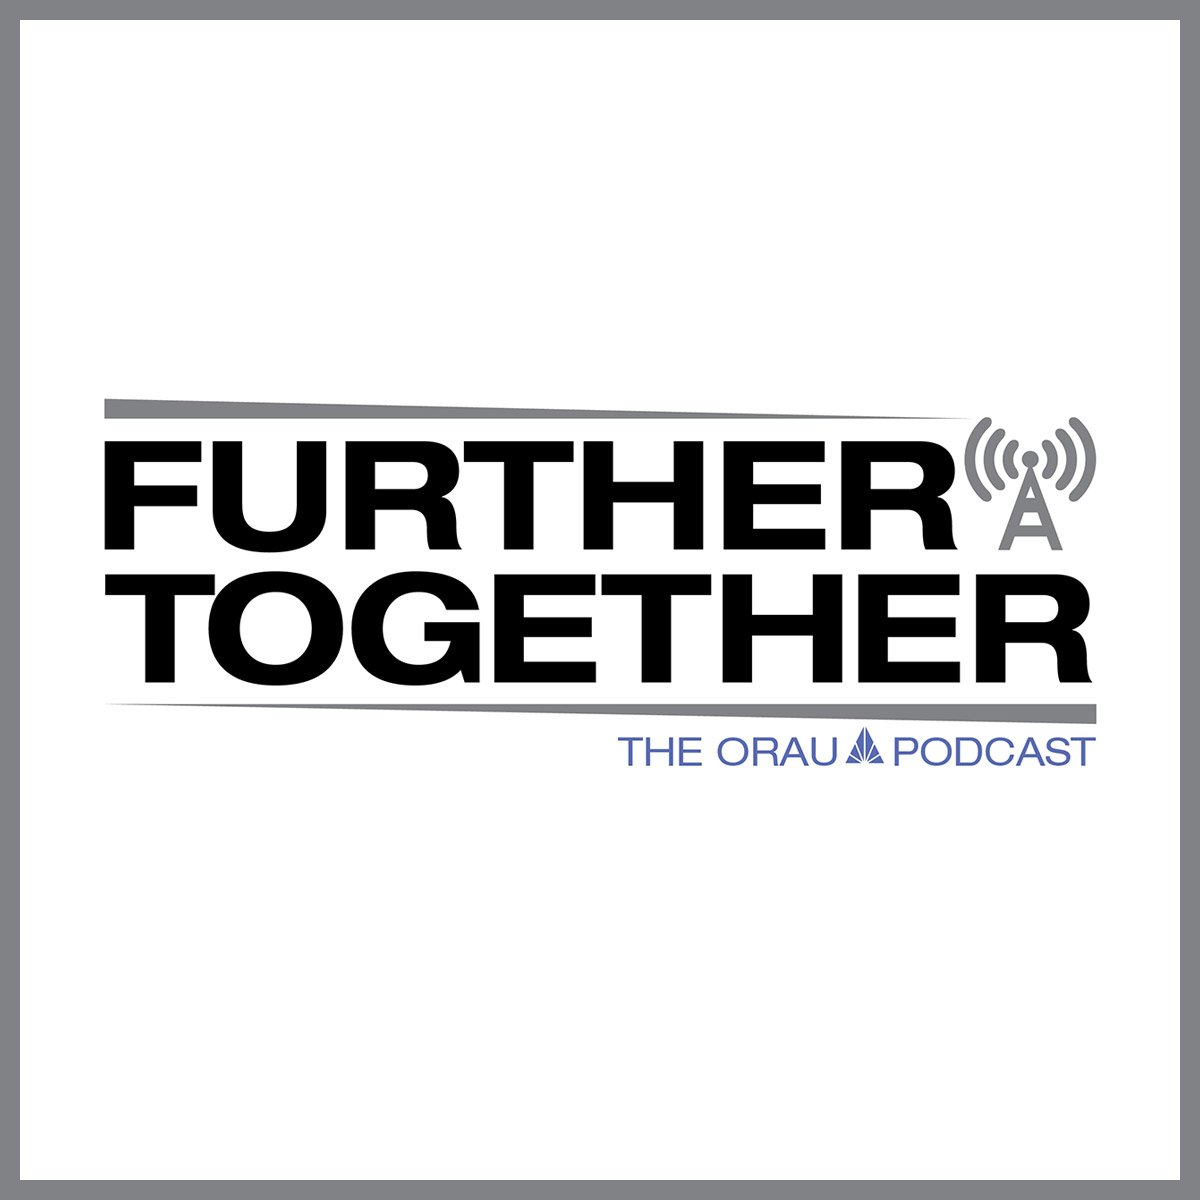 Further Together, the ORAU podcast